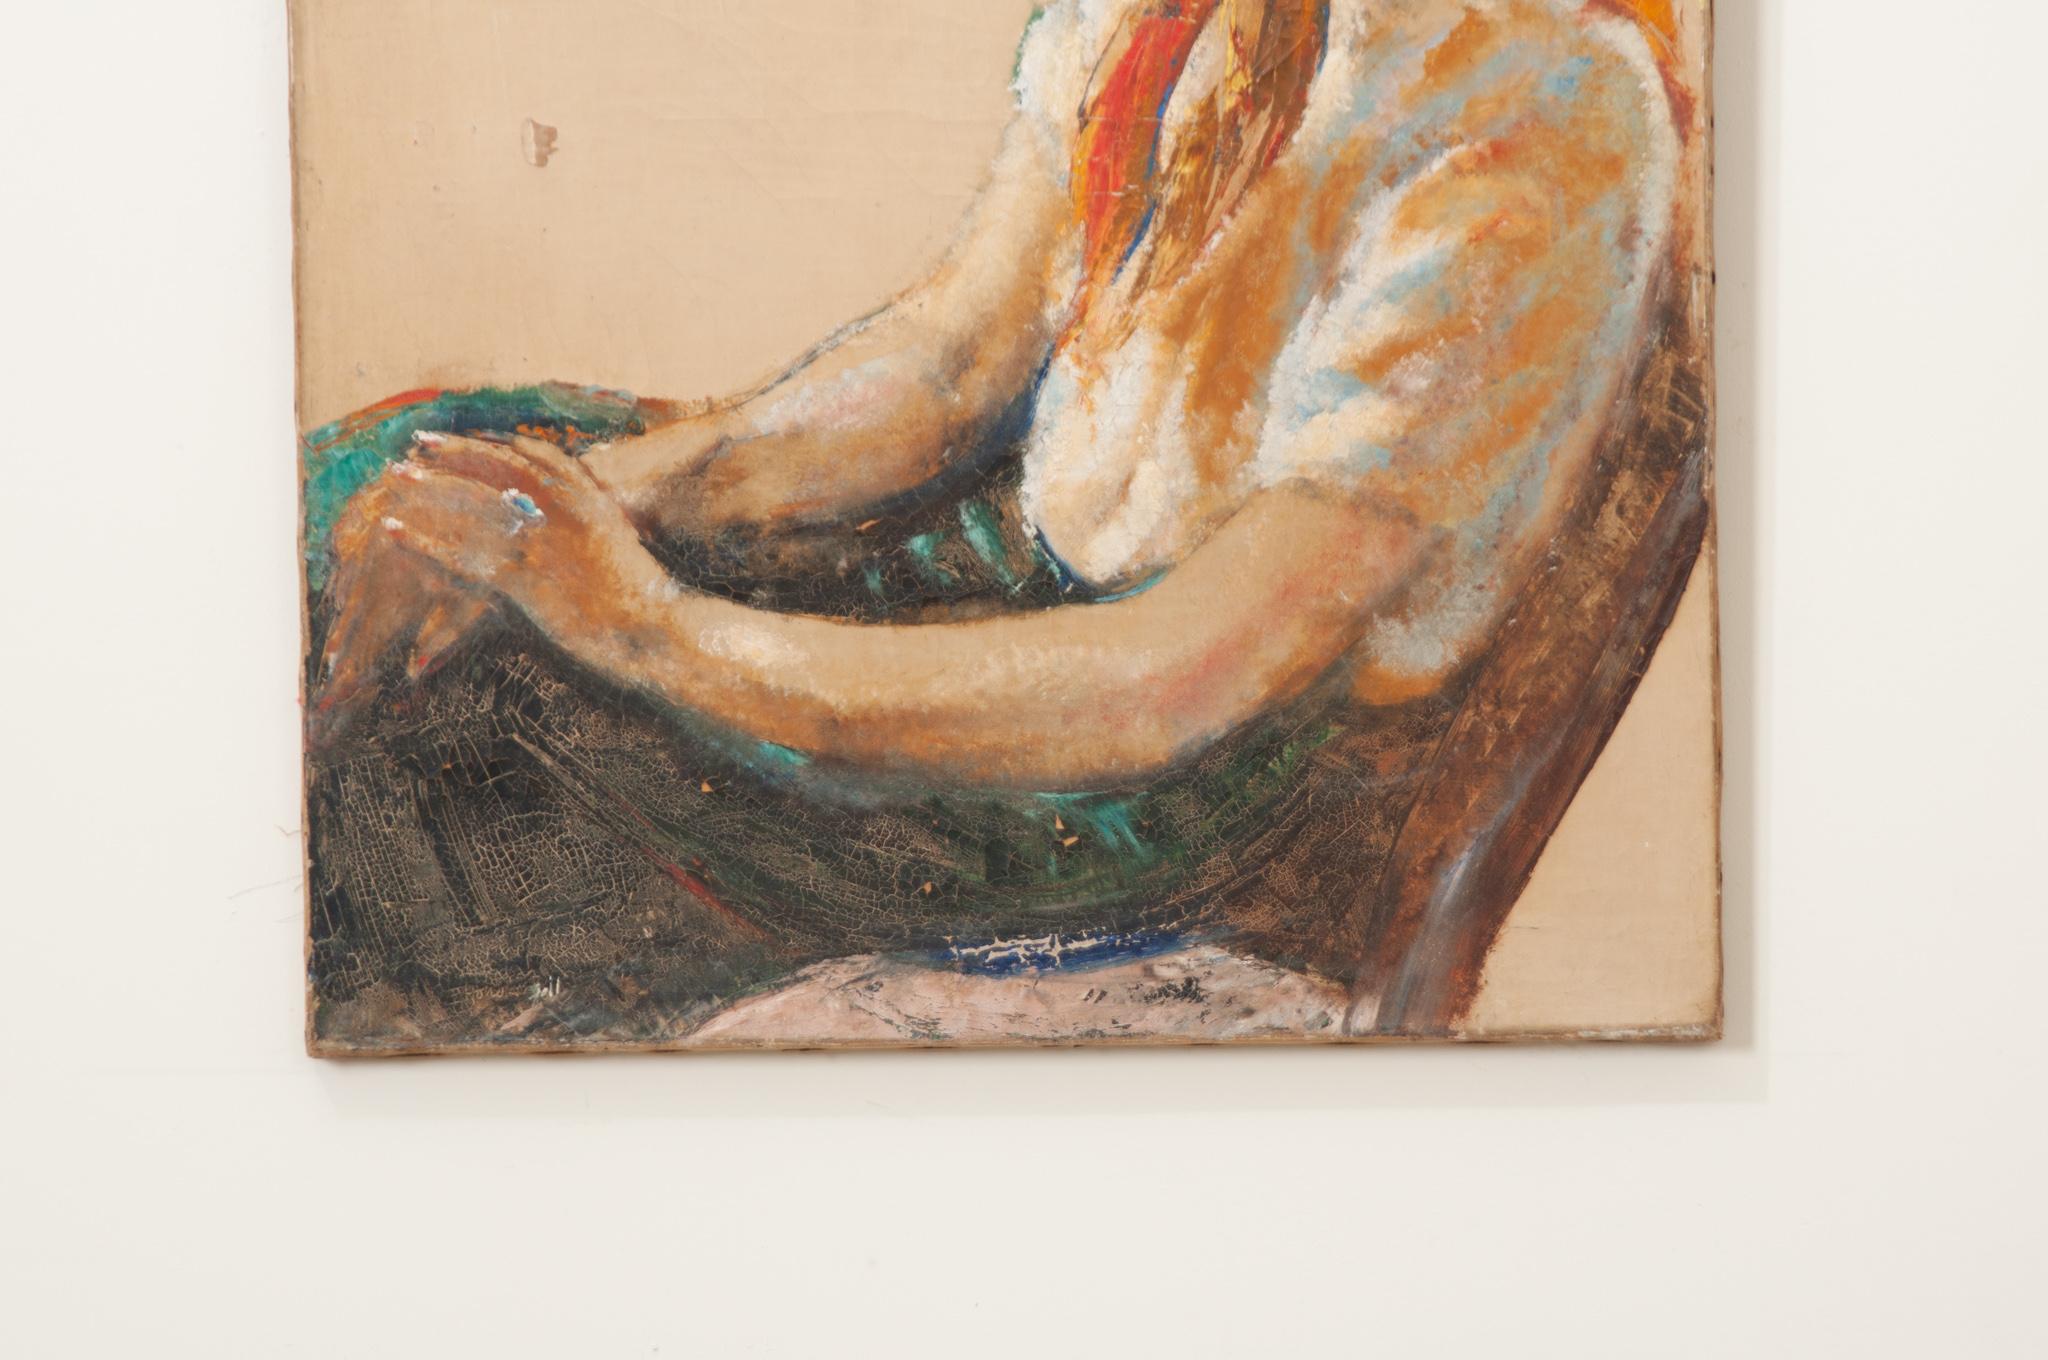 A young woman sits posed with her hands in her lap, in front of an abstract background. The texture of the painting is interesting and complex, painted on canvas. No signature found. Be sure to view all the images to see the details and current